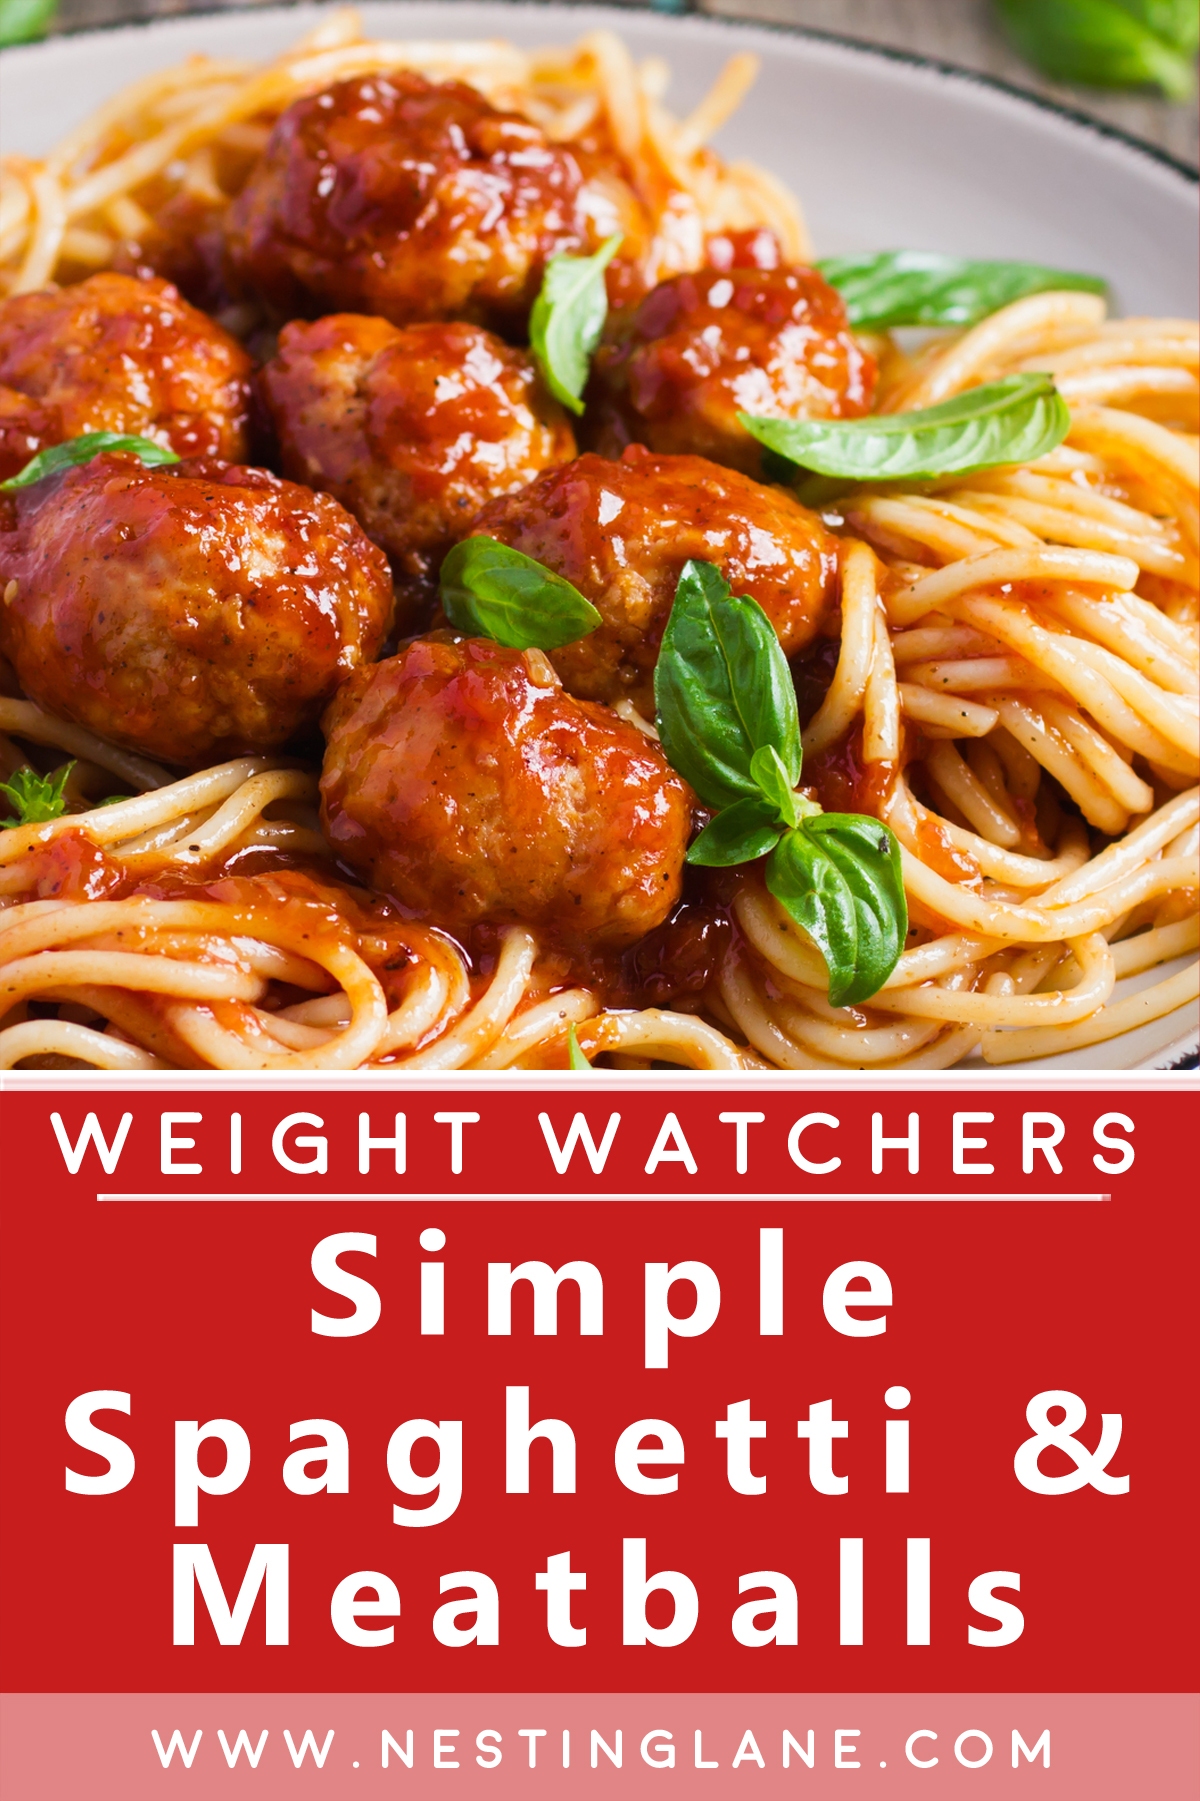 Graphic for Pinterest of Simple Weight Watchers Spaghetti and Meatballs Recipe.